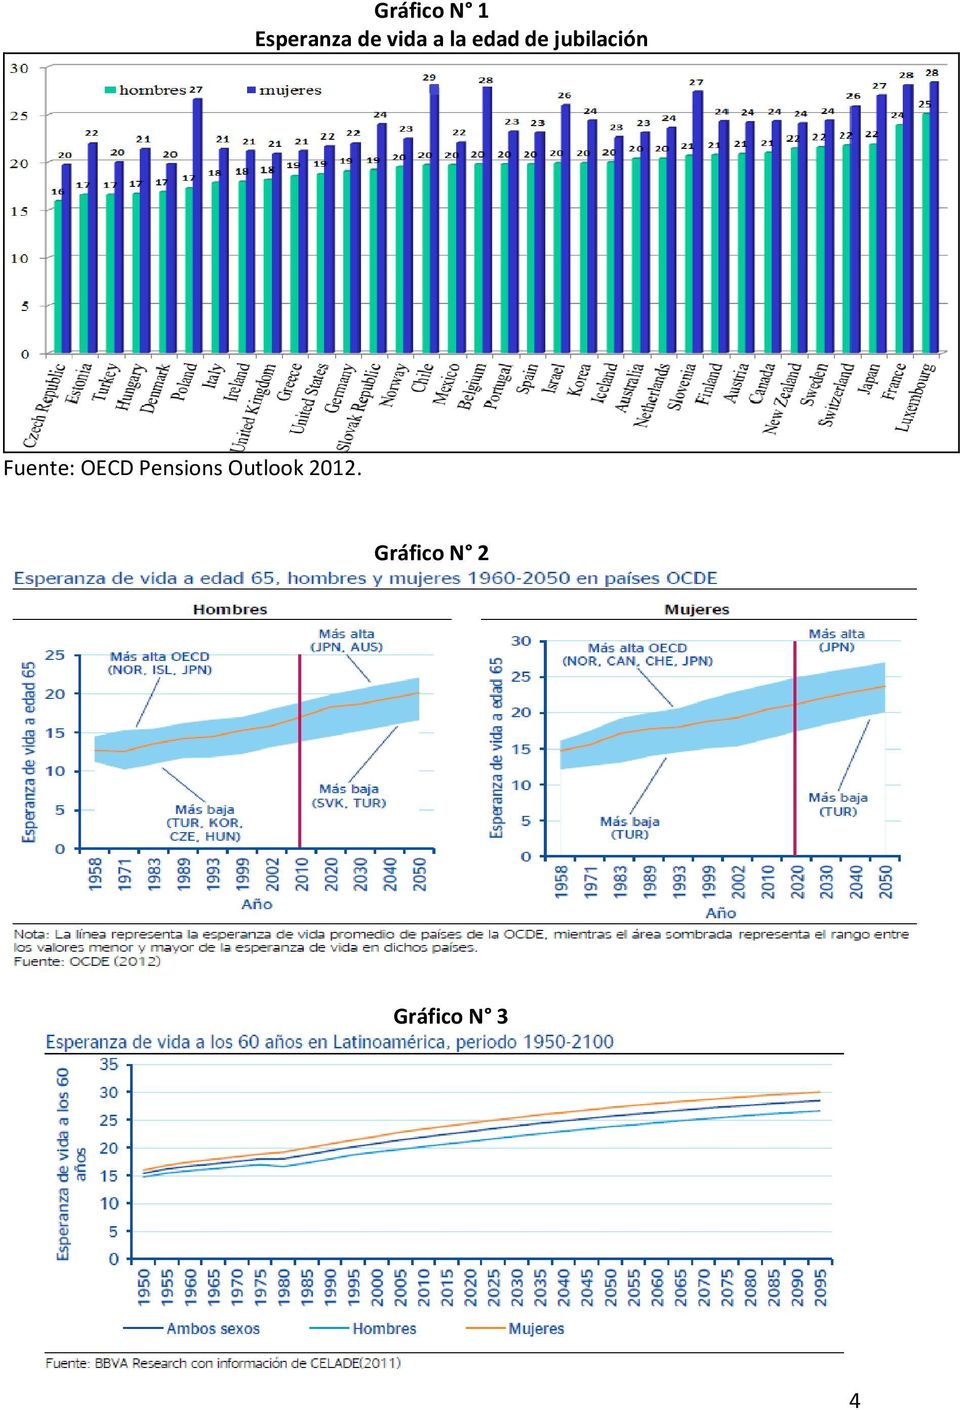 Fuente: OECD Pensions